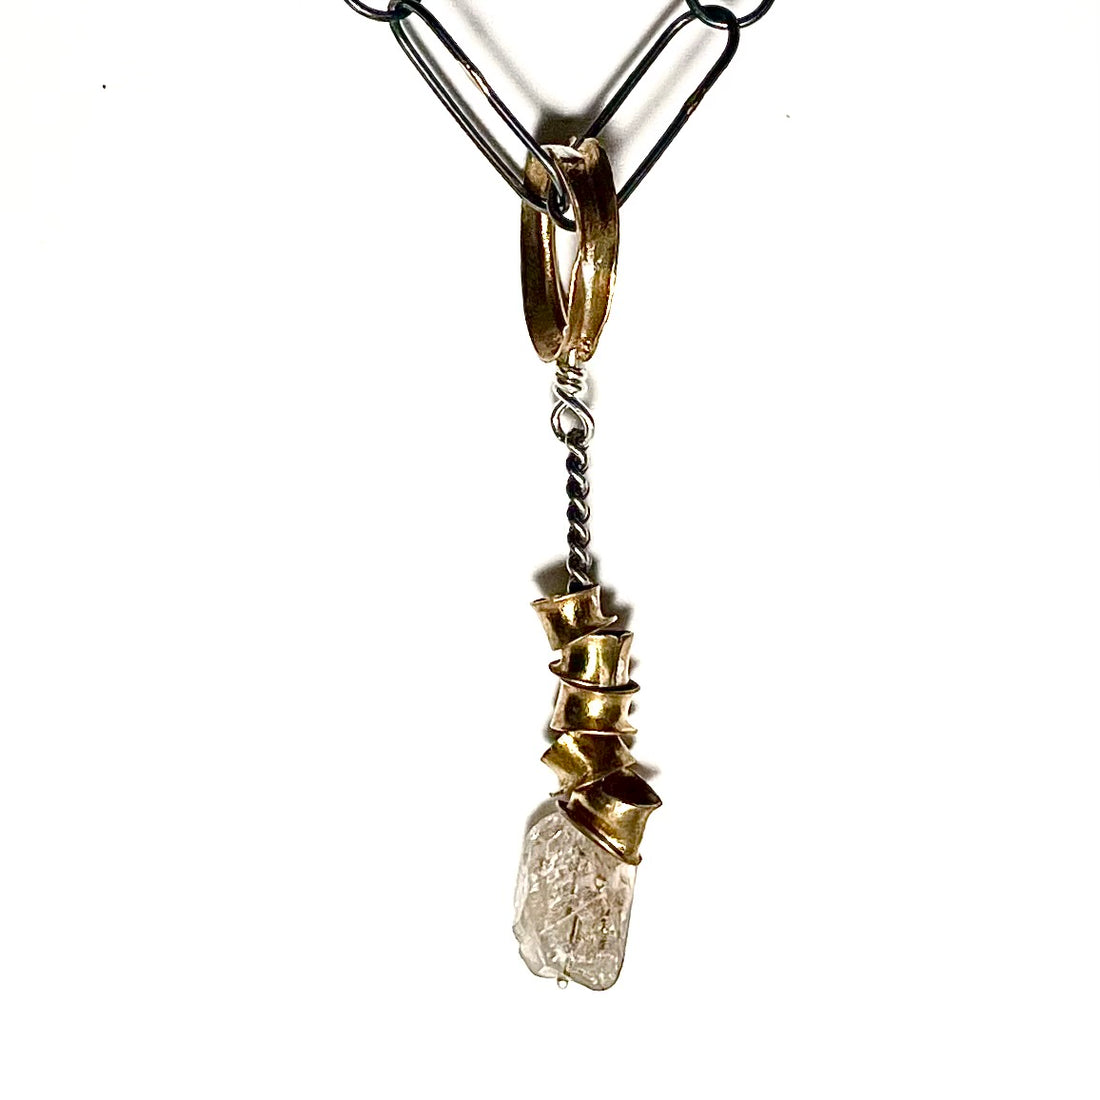 The Rooted Talisman draws its inspiration from the awe-inspiring design and functionality of the human spinal cord. Much like the intricate network of the spine, this talisman symbolizes strength, resilience, and the remarkable agility that resides within the core of our being.  Shown here on Paperclip Chain.